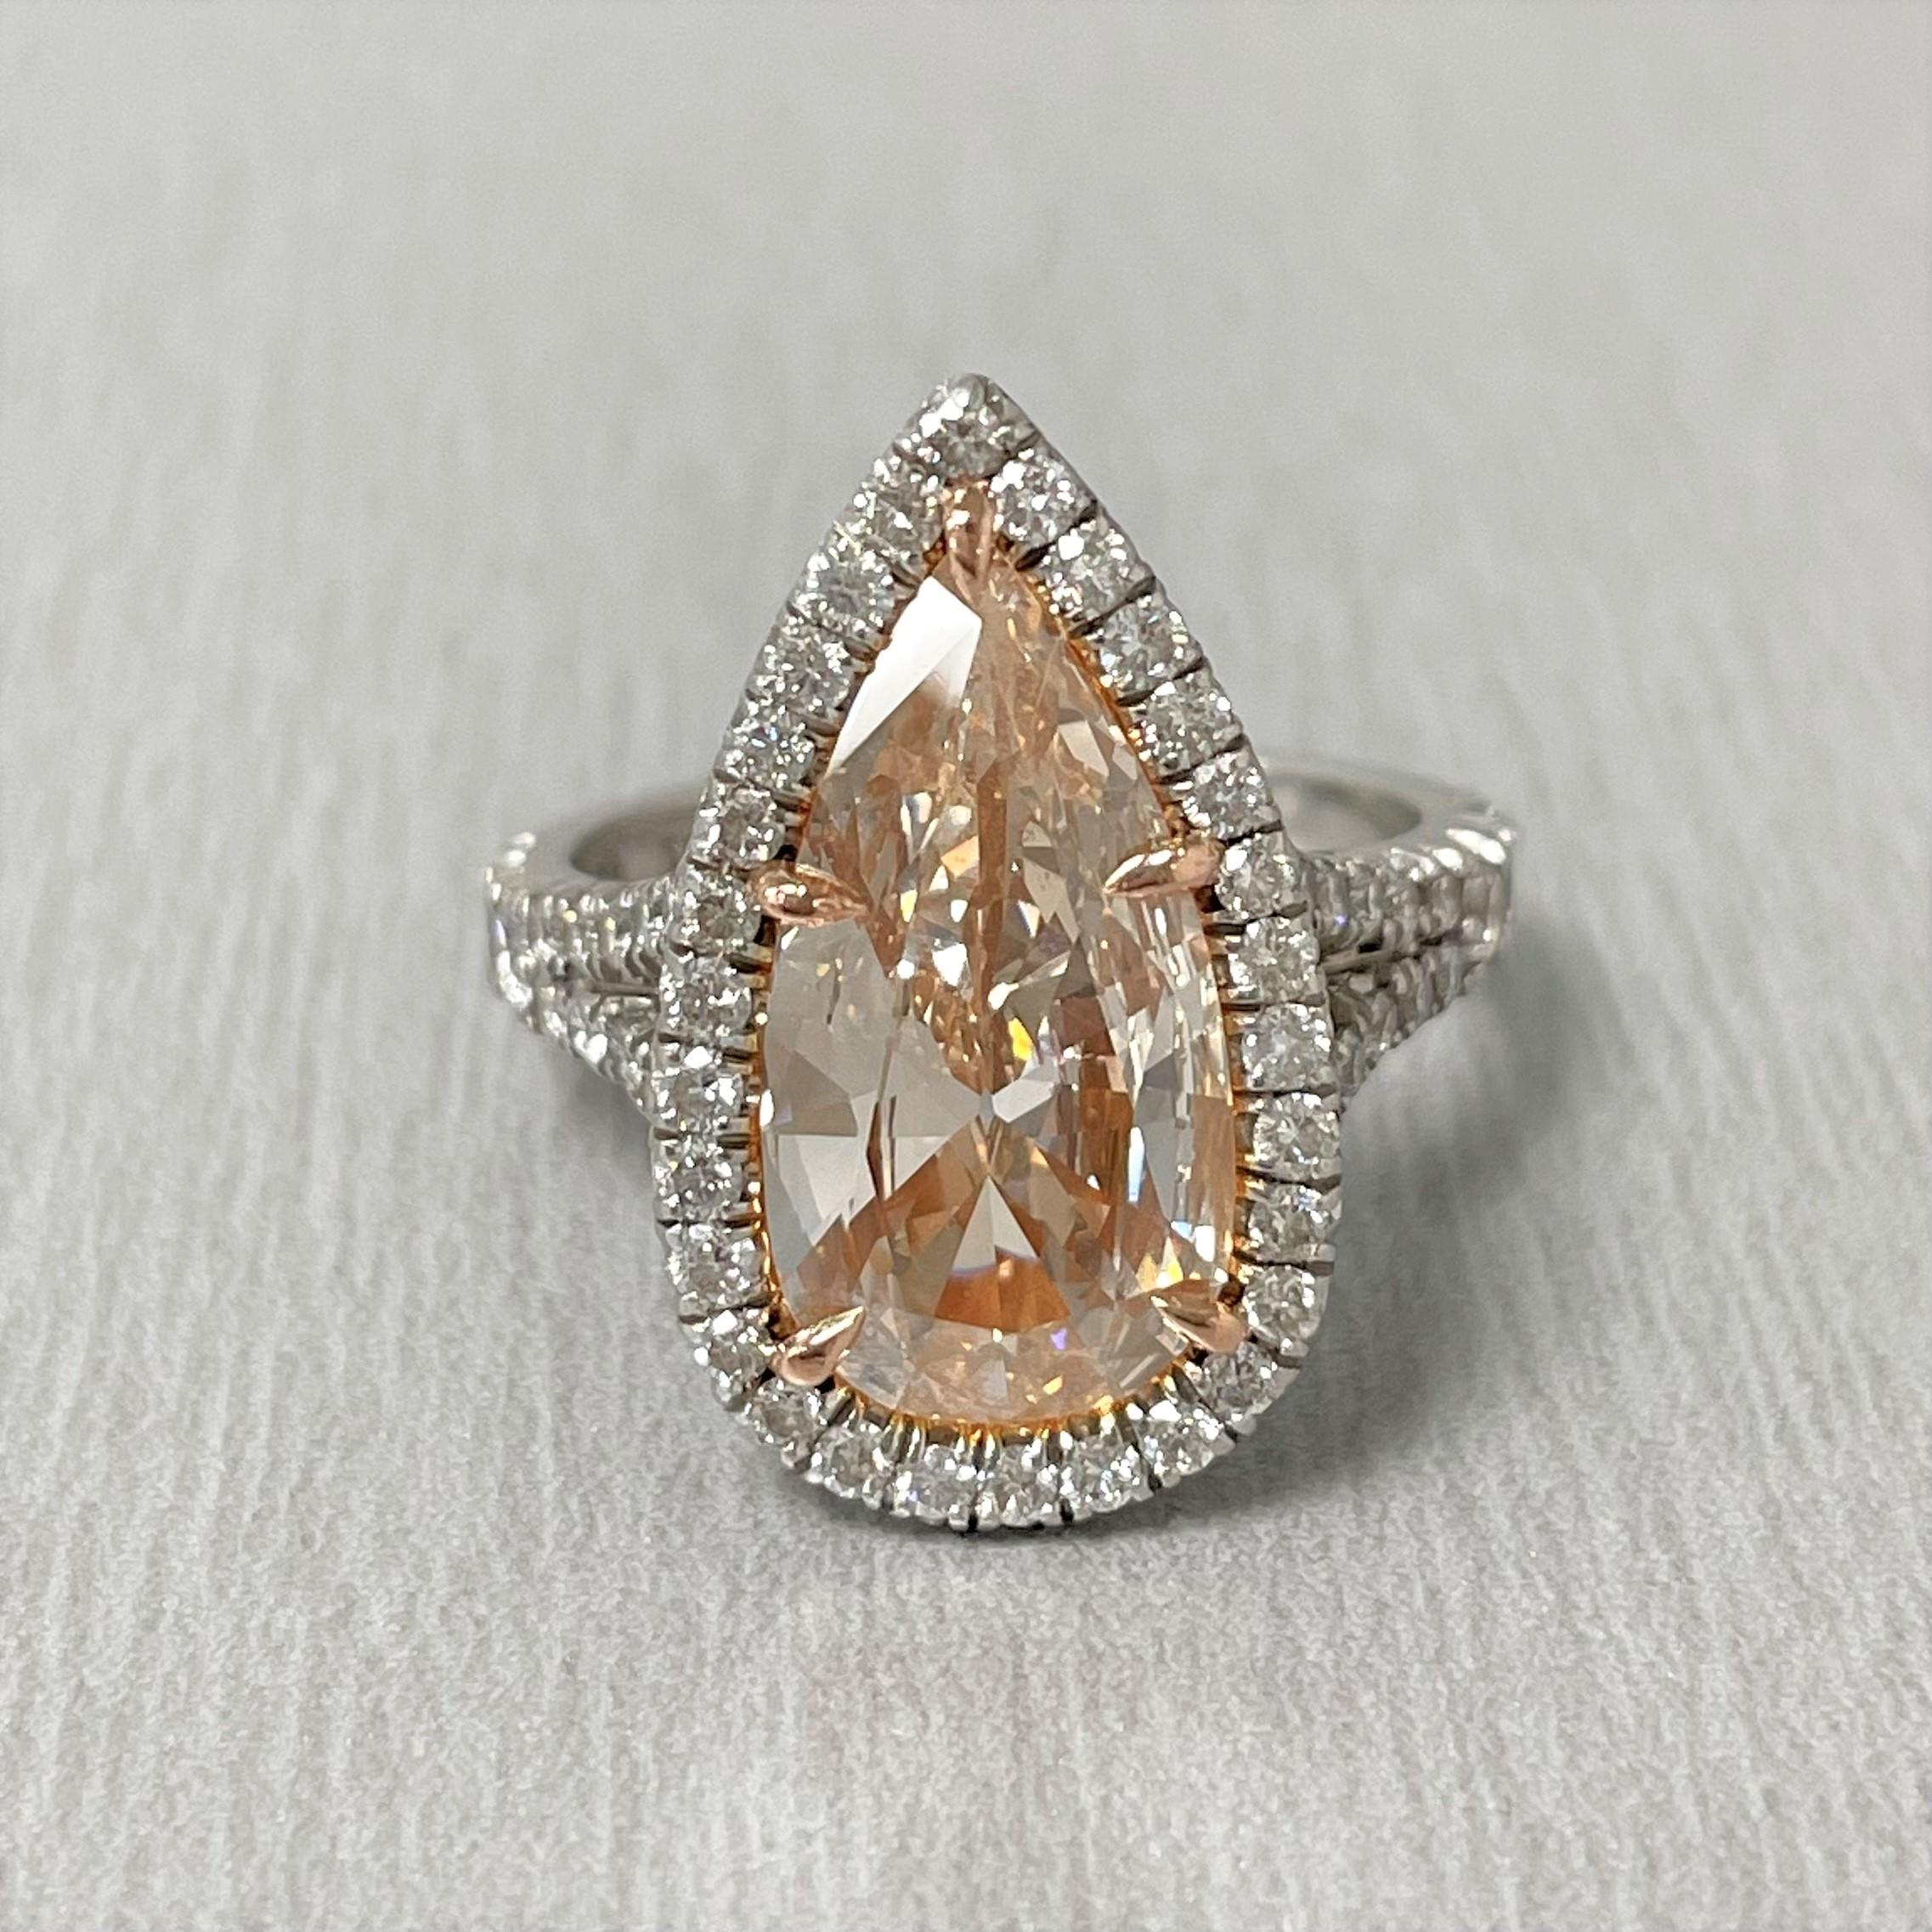 A stunning Pinkish diamond ring, the Rose features a elegant design with oversized Pinkish Pear Shape diamond expertly set in a statement halo setting to impress and captivate.

Center Diamond Shape: Pear
Center Diamond Weight: 3.03 ct (Measures